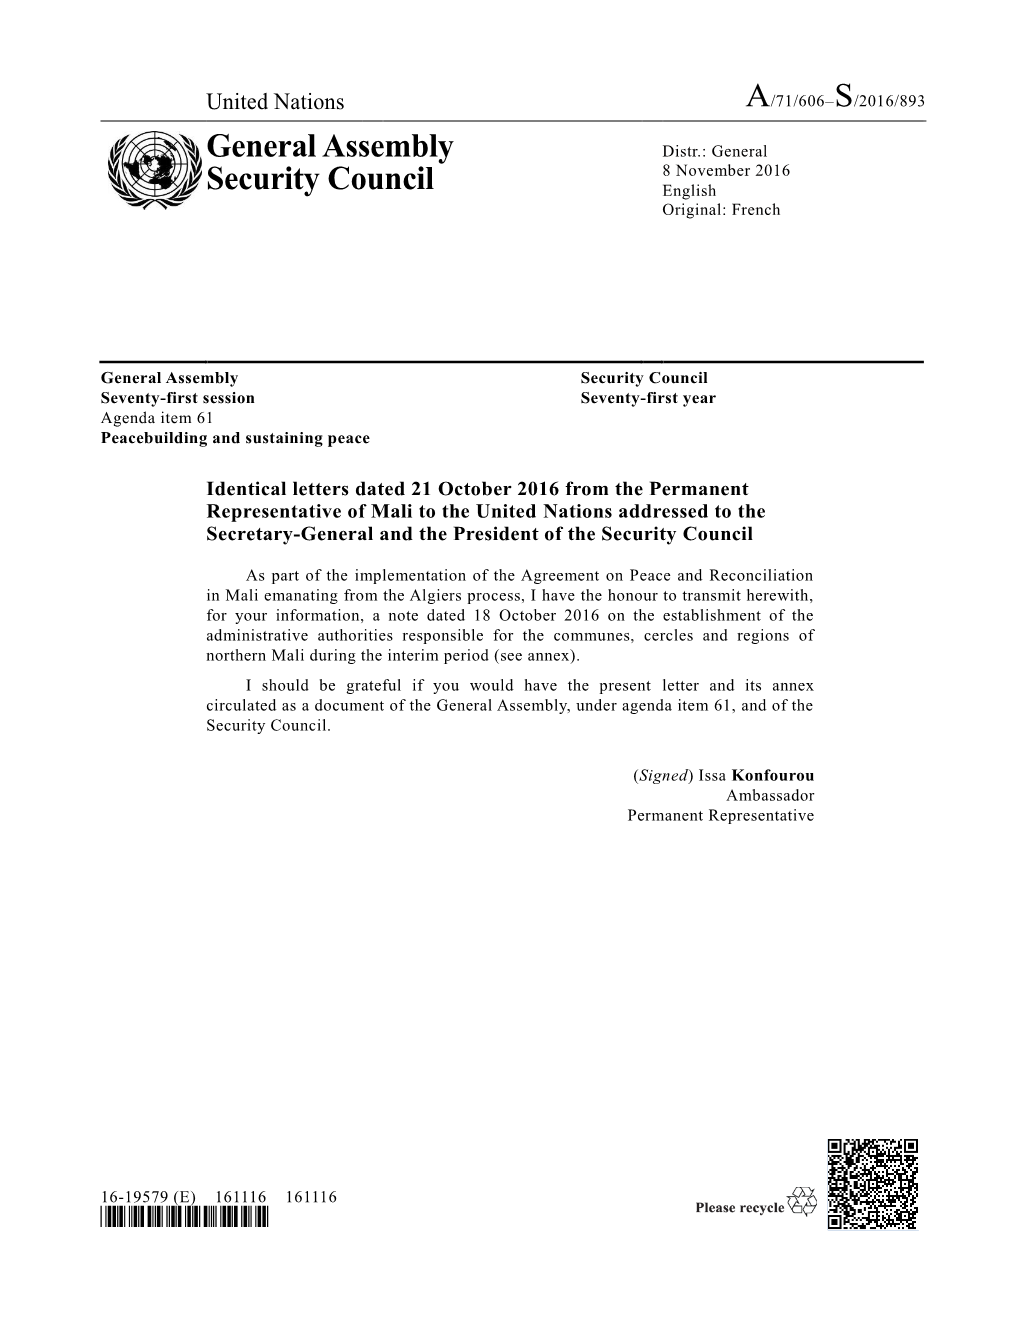 General Assembly Security Council Seventy-First Session Seventy-First Year Agenda Item 61 Peacebuilding and Sustaining Peace